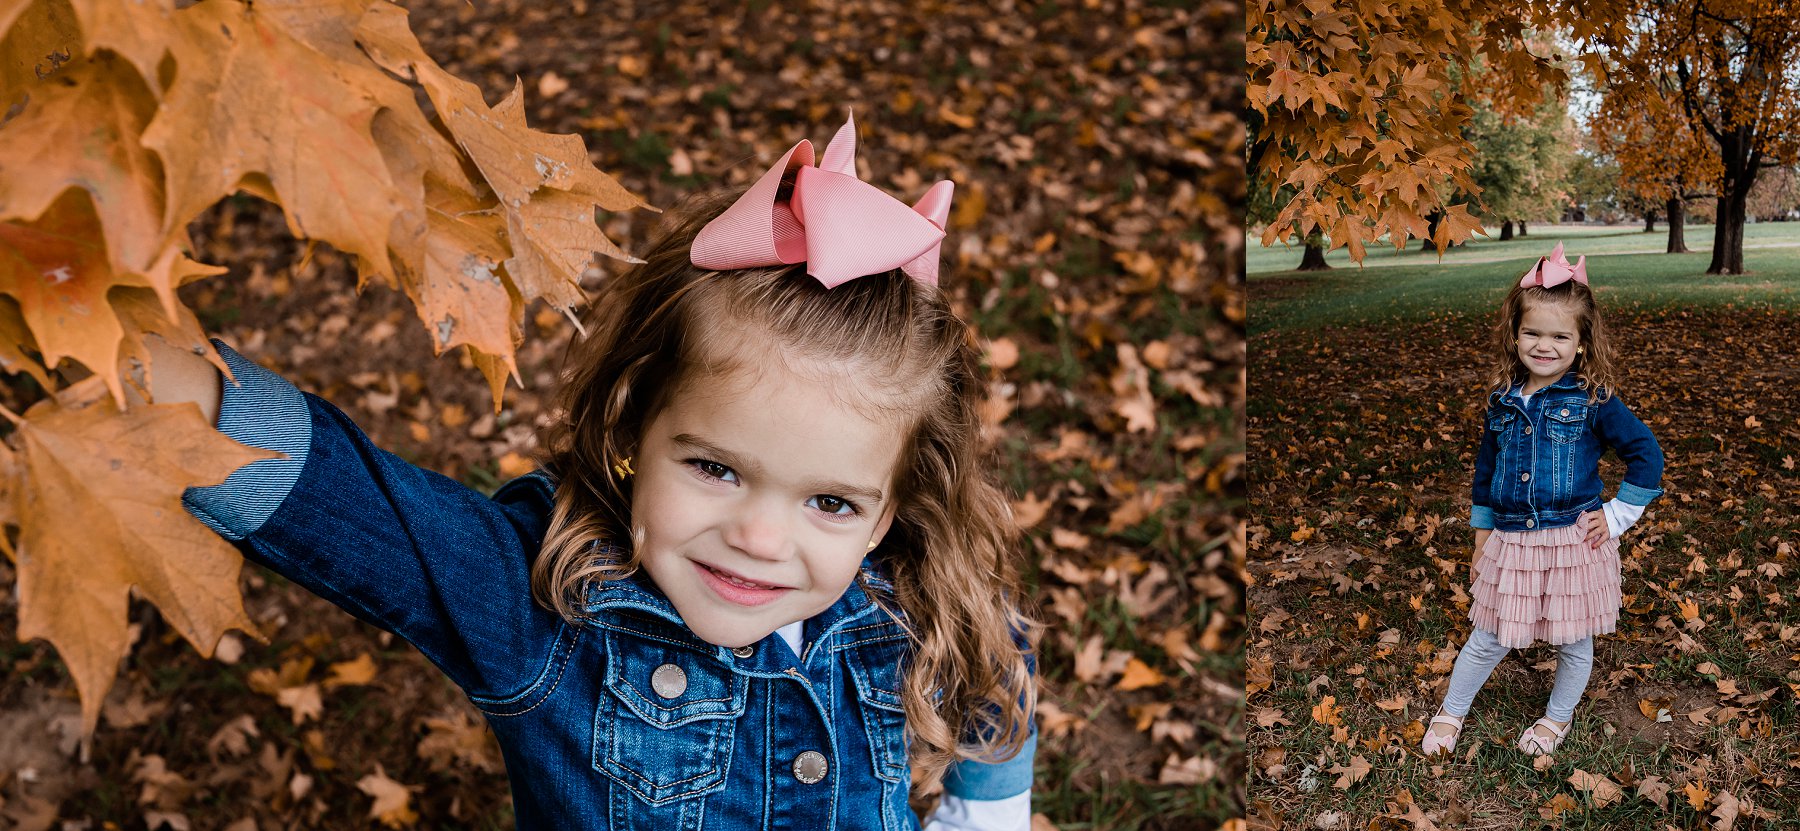 Fall Family Photography at Belvoir WInery by Family Photographer in Kansas City, Merry Ohler (9)